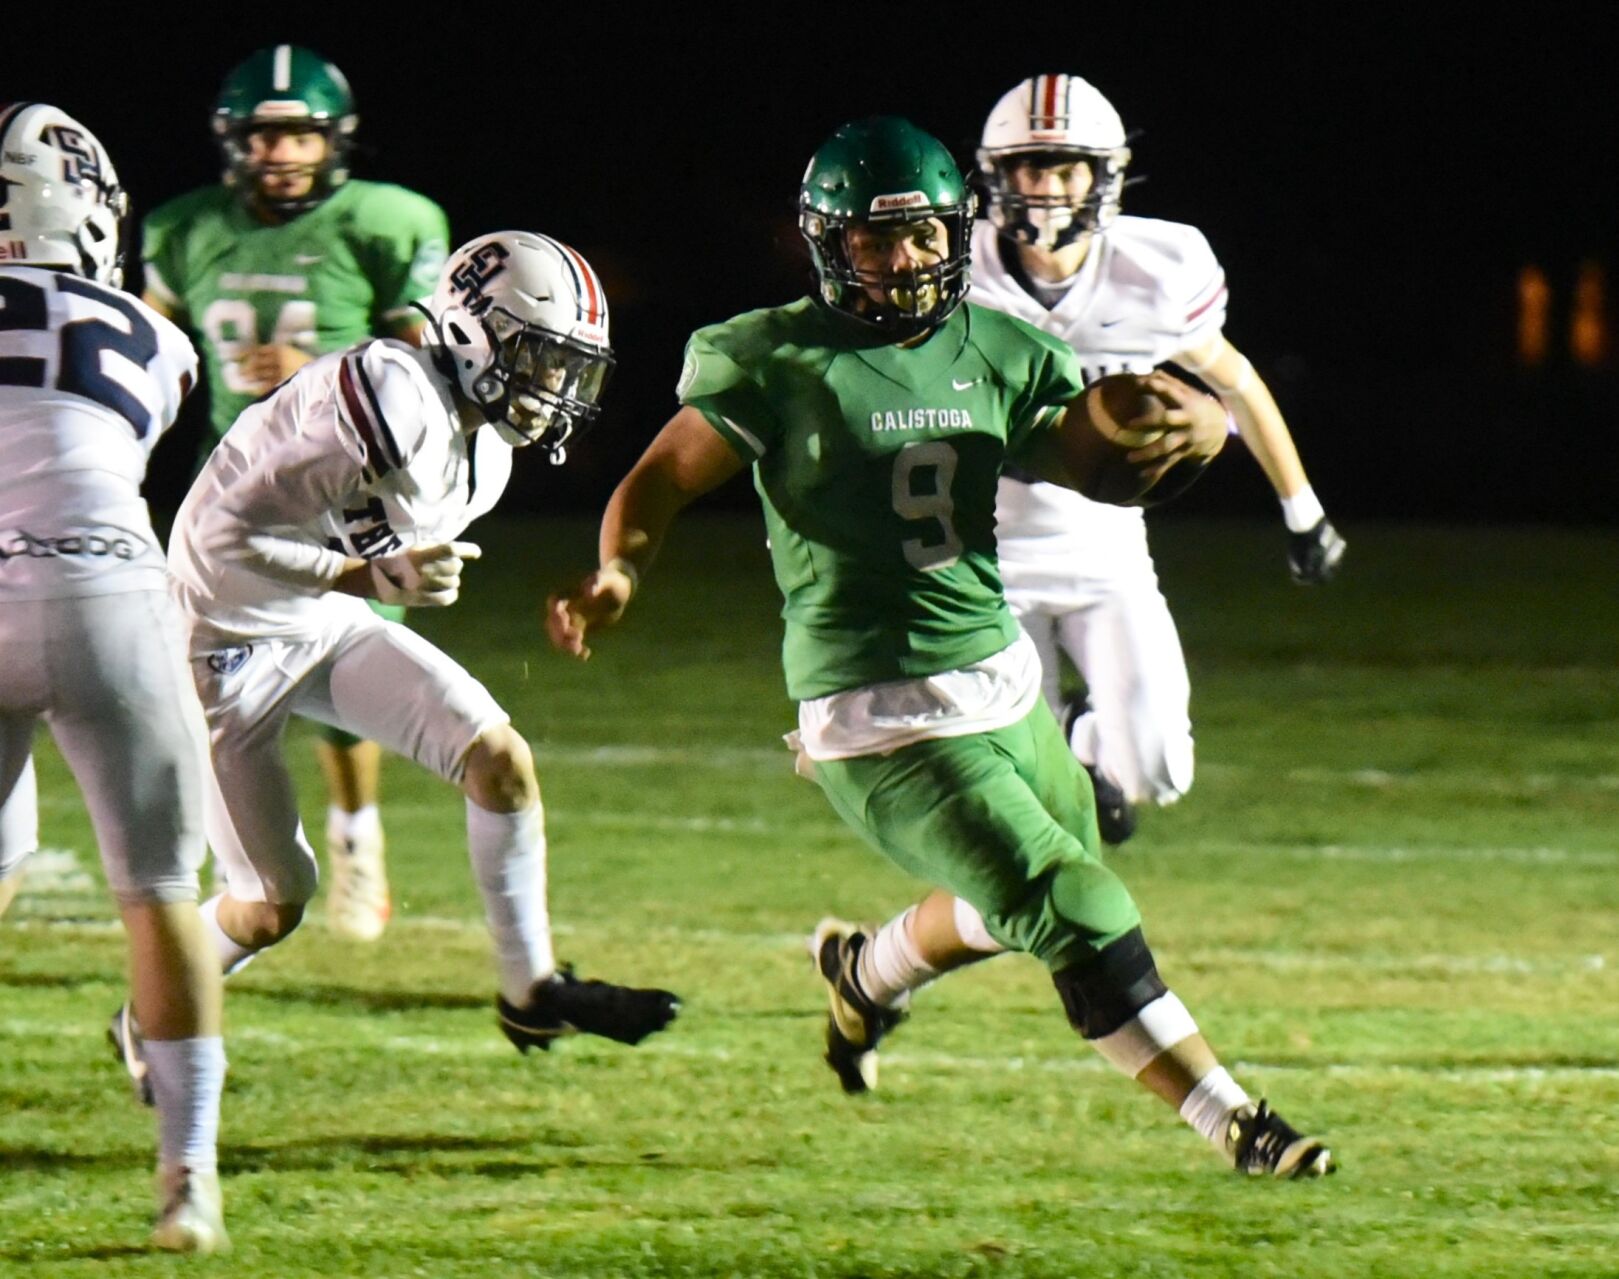 Calistoga Wildcats Fall to Stuart Hall Knights by Score of 69-24 in High School Football Game